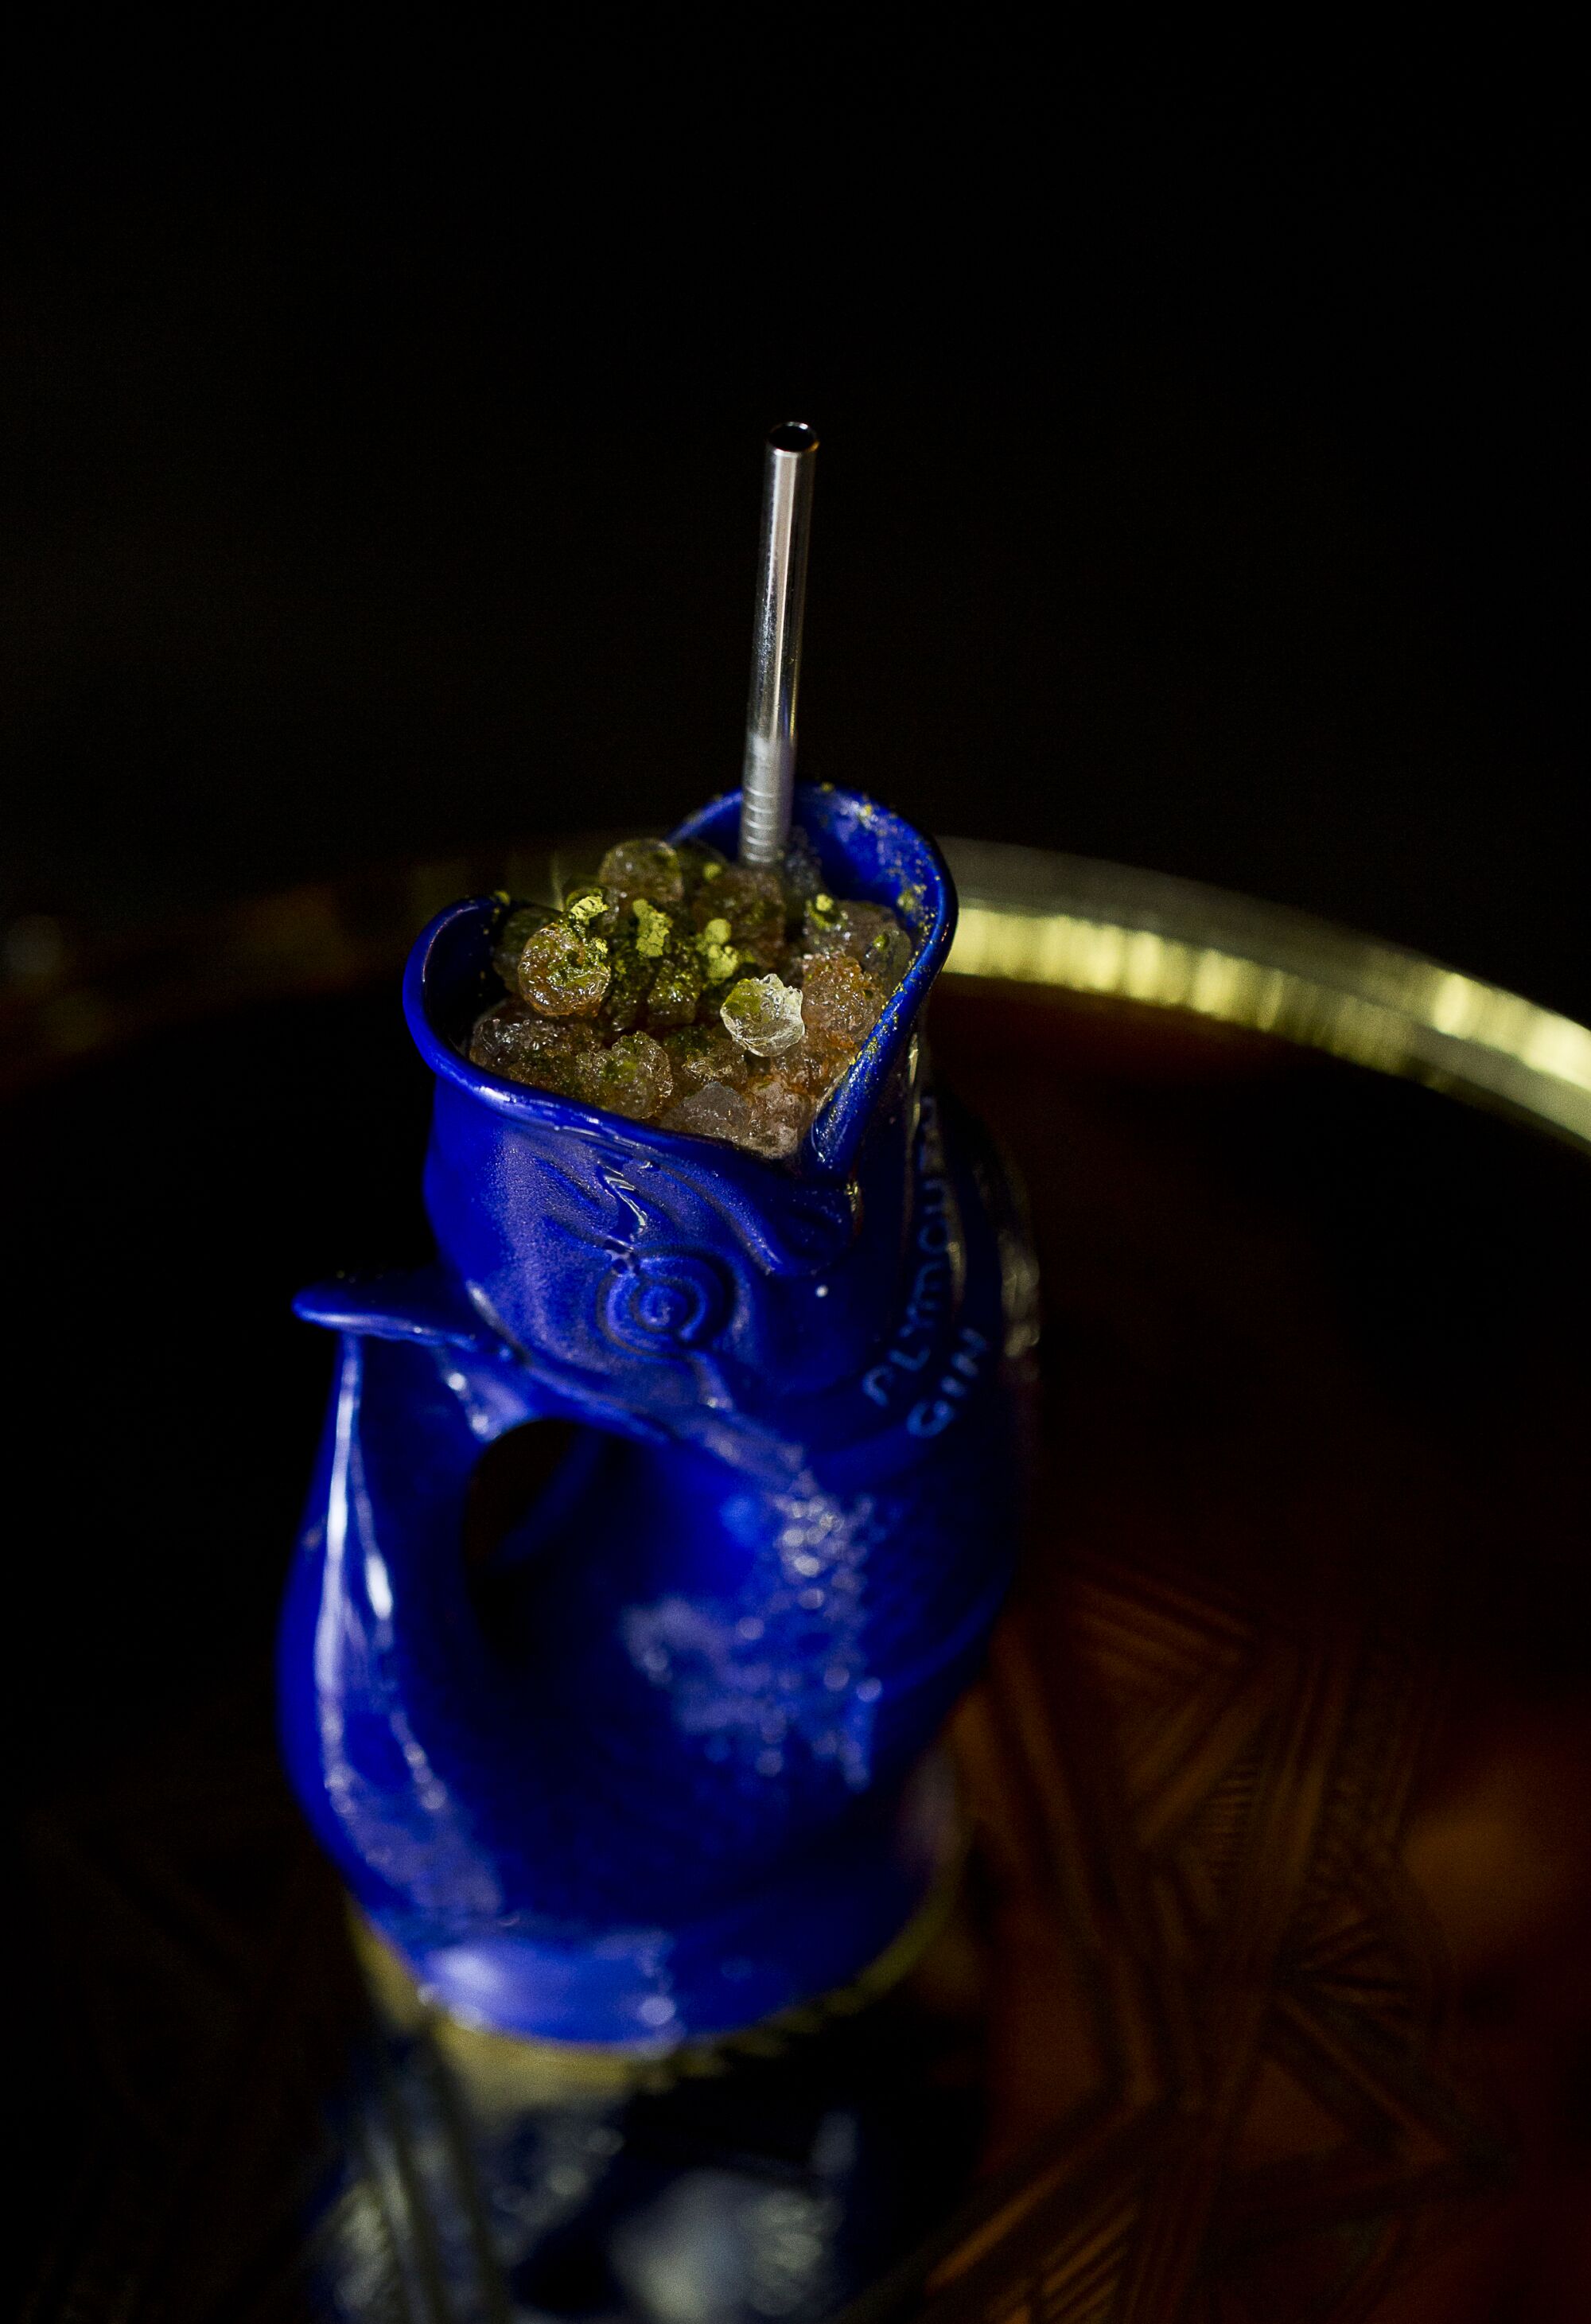 A blue fish-shaped cocktail glass with a metal straw.